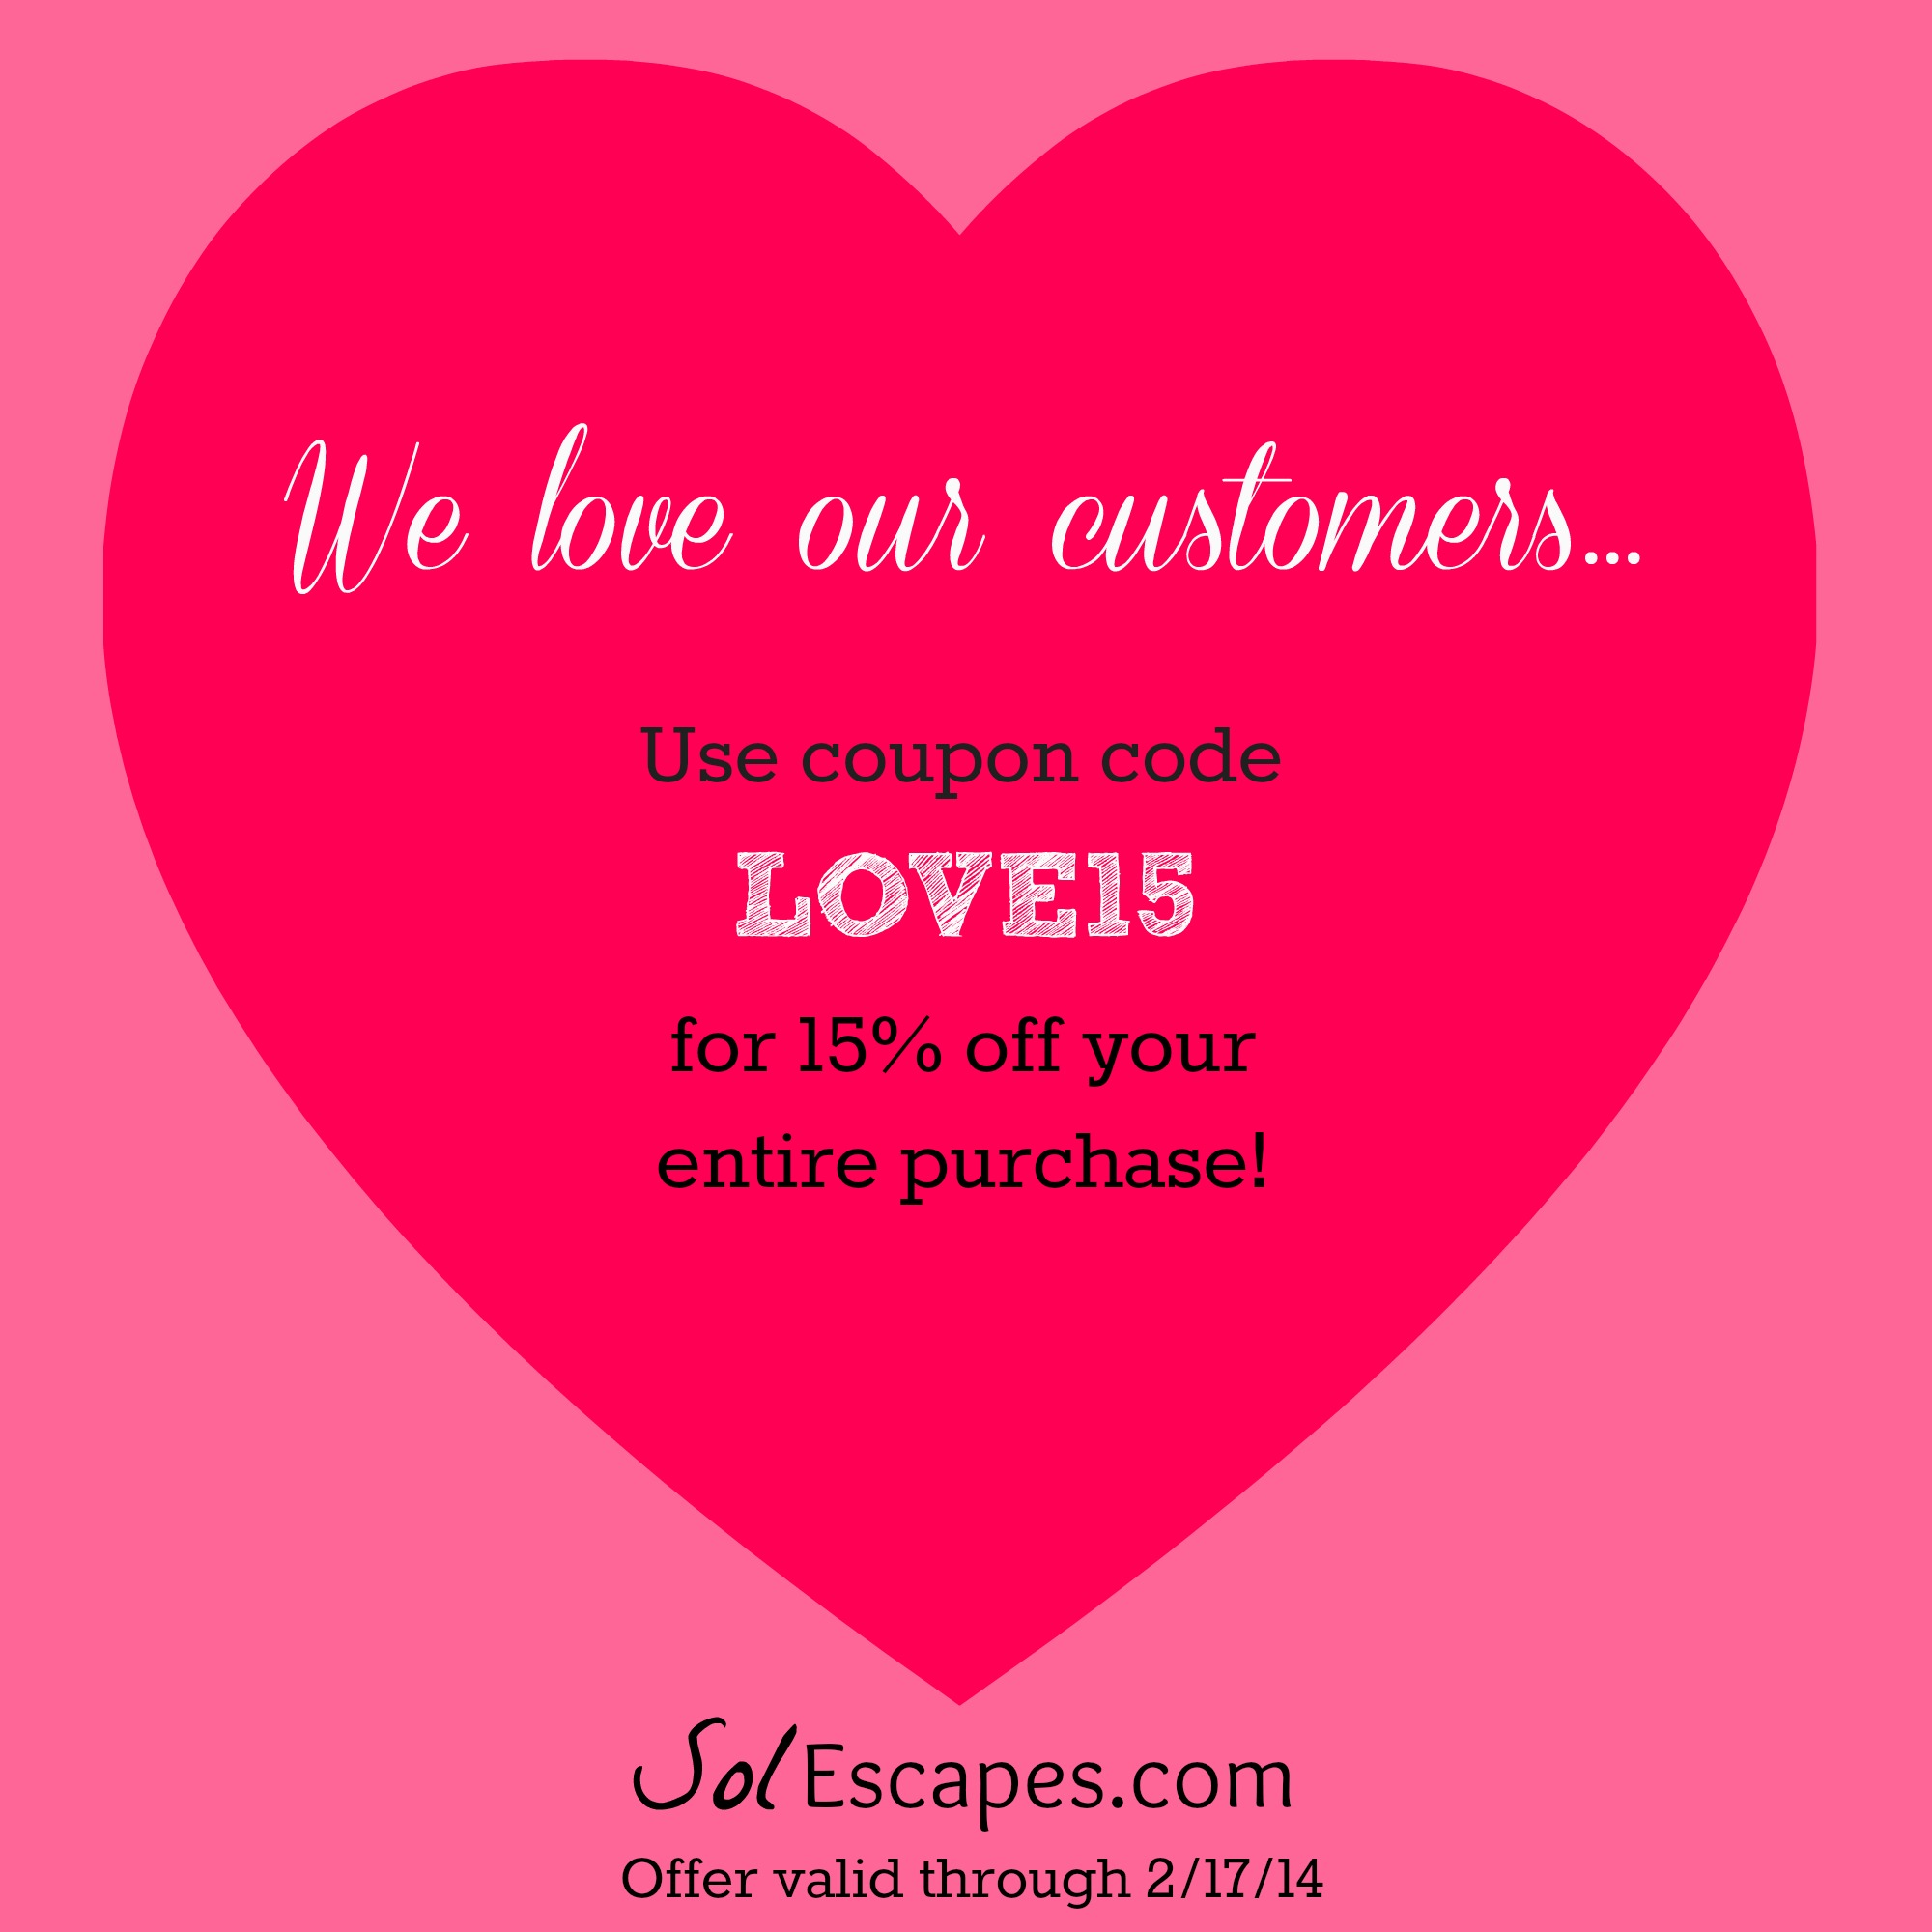 SolEscapes Announces a Special Discount, Just in Time for Valentine’s ...